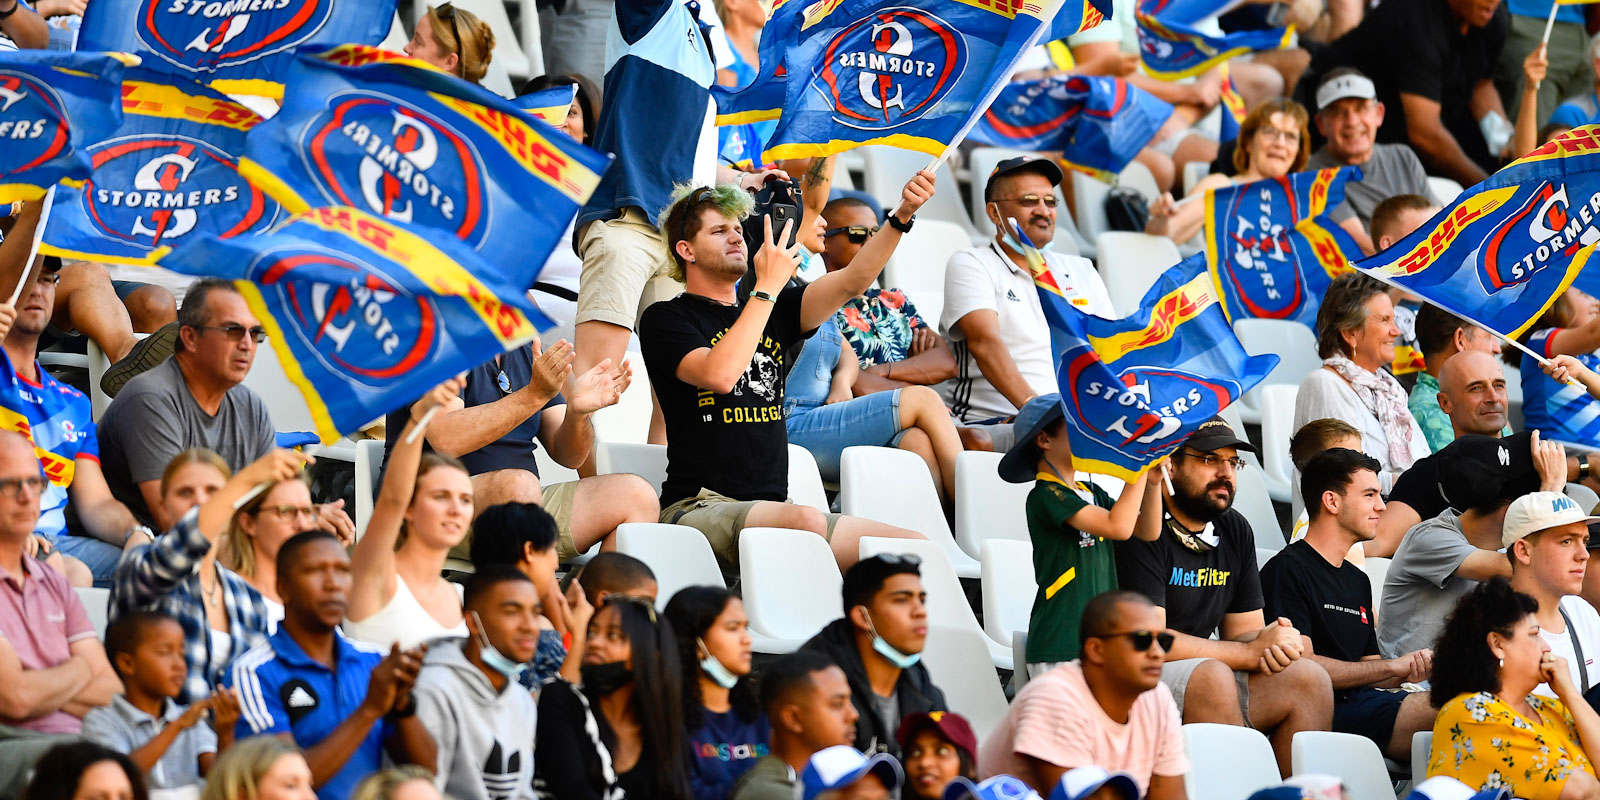 Happy DHL Stormers fans in DHL Stadium, Cape Town.